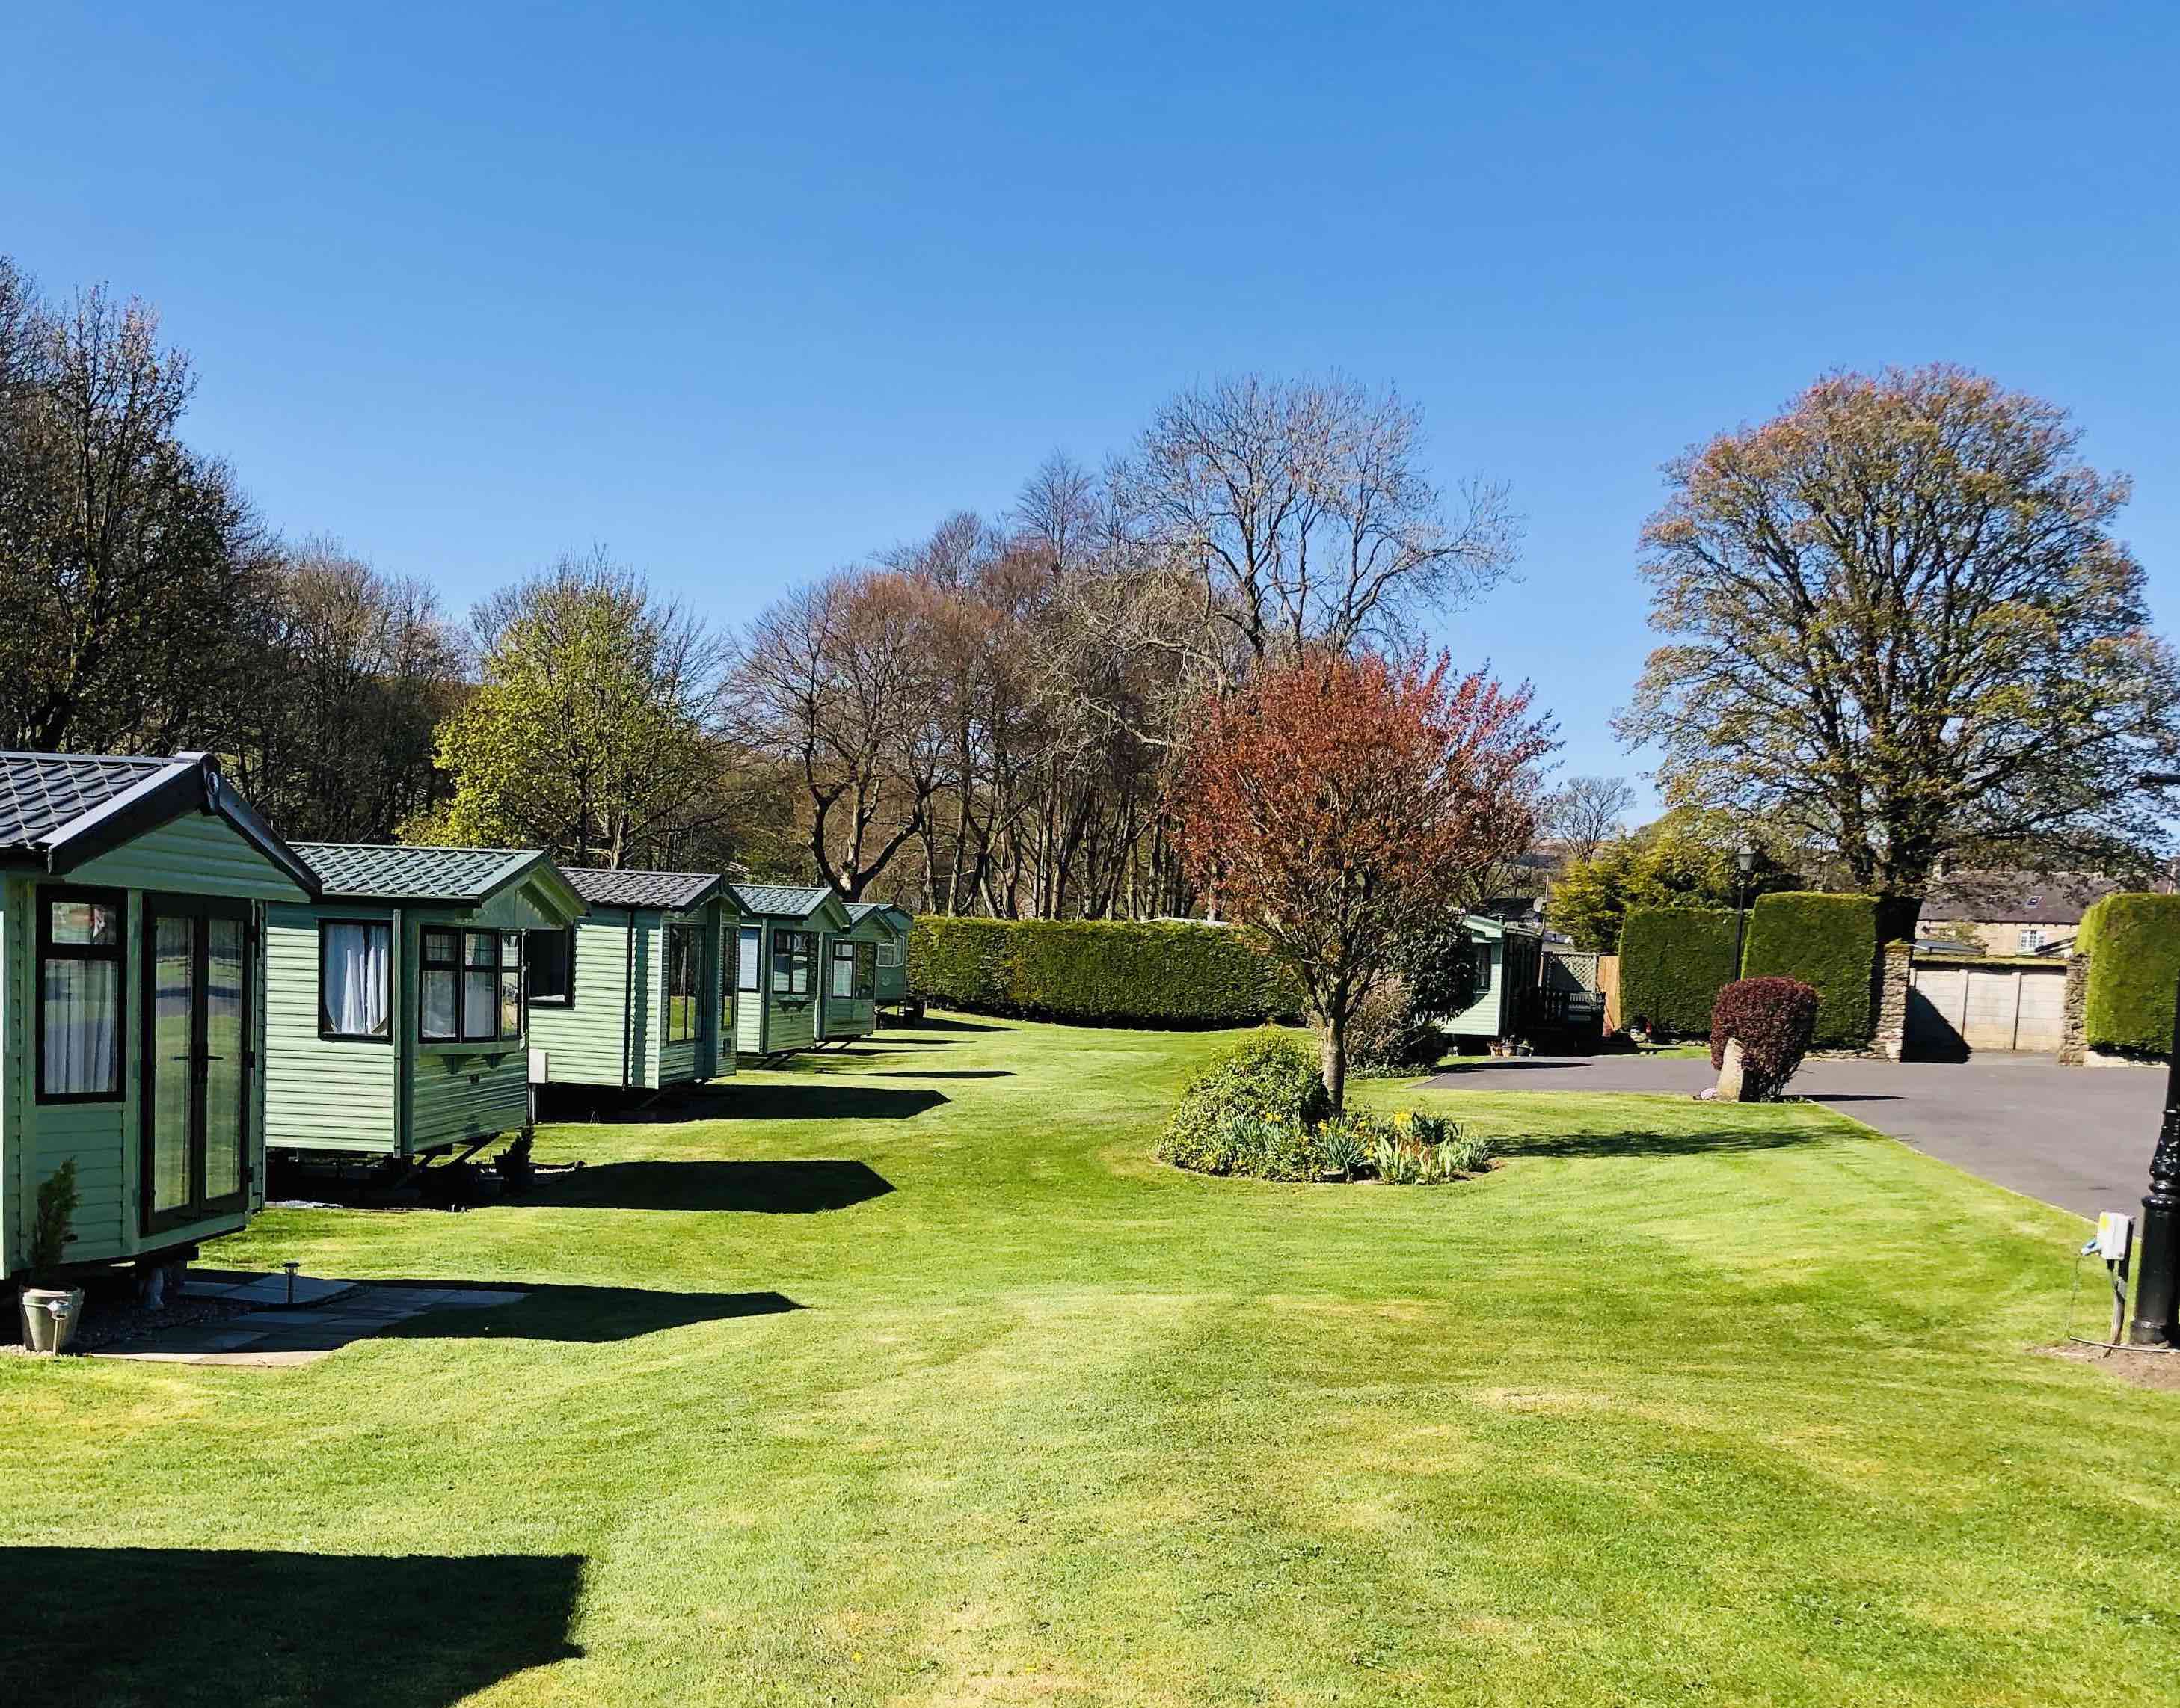 Weardale Holiday Home Park, County Durham - sited new and used caravans